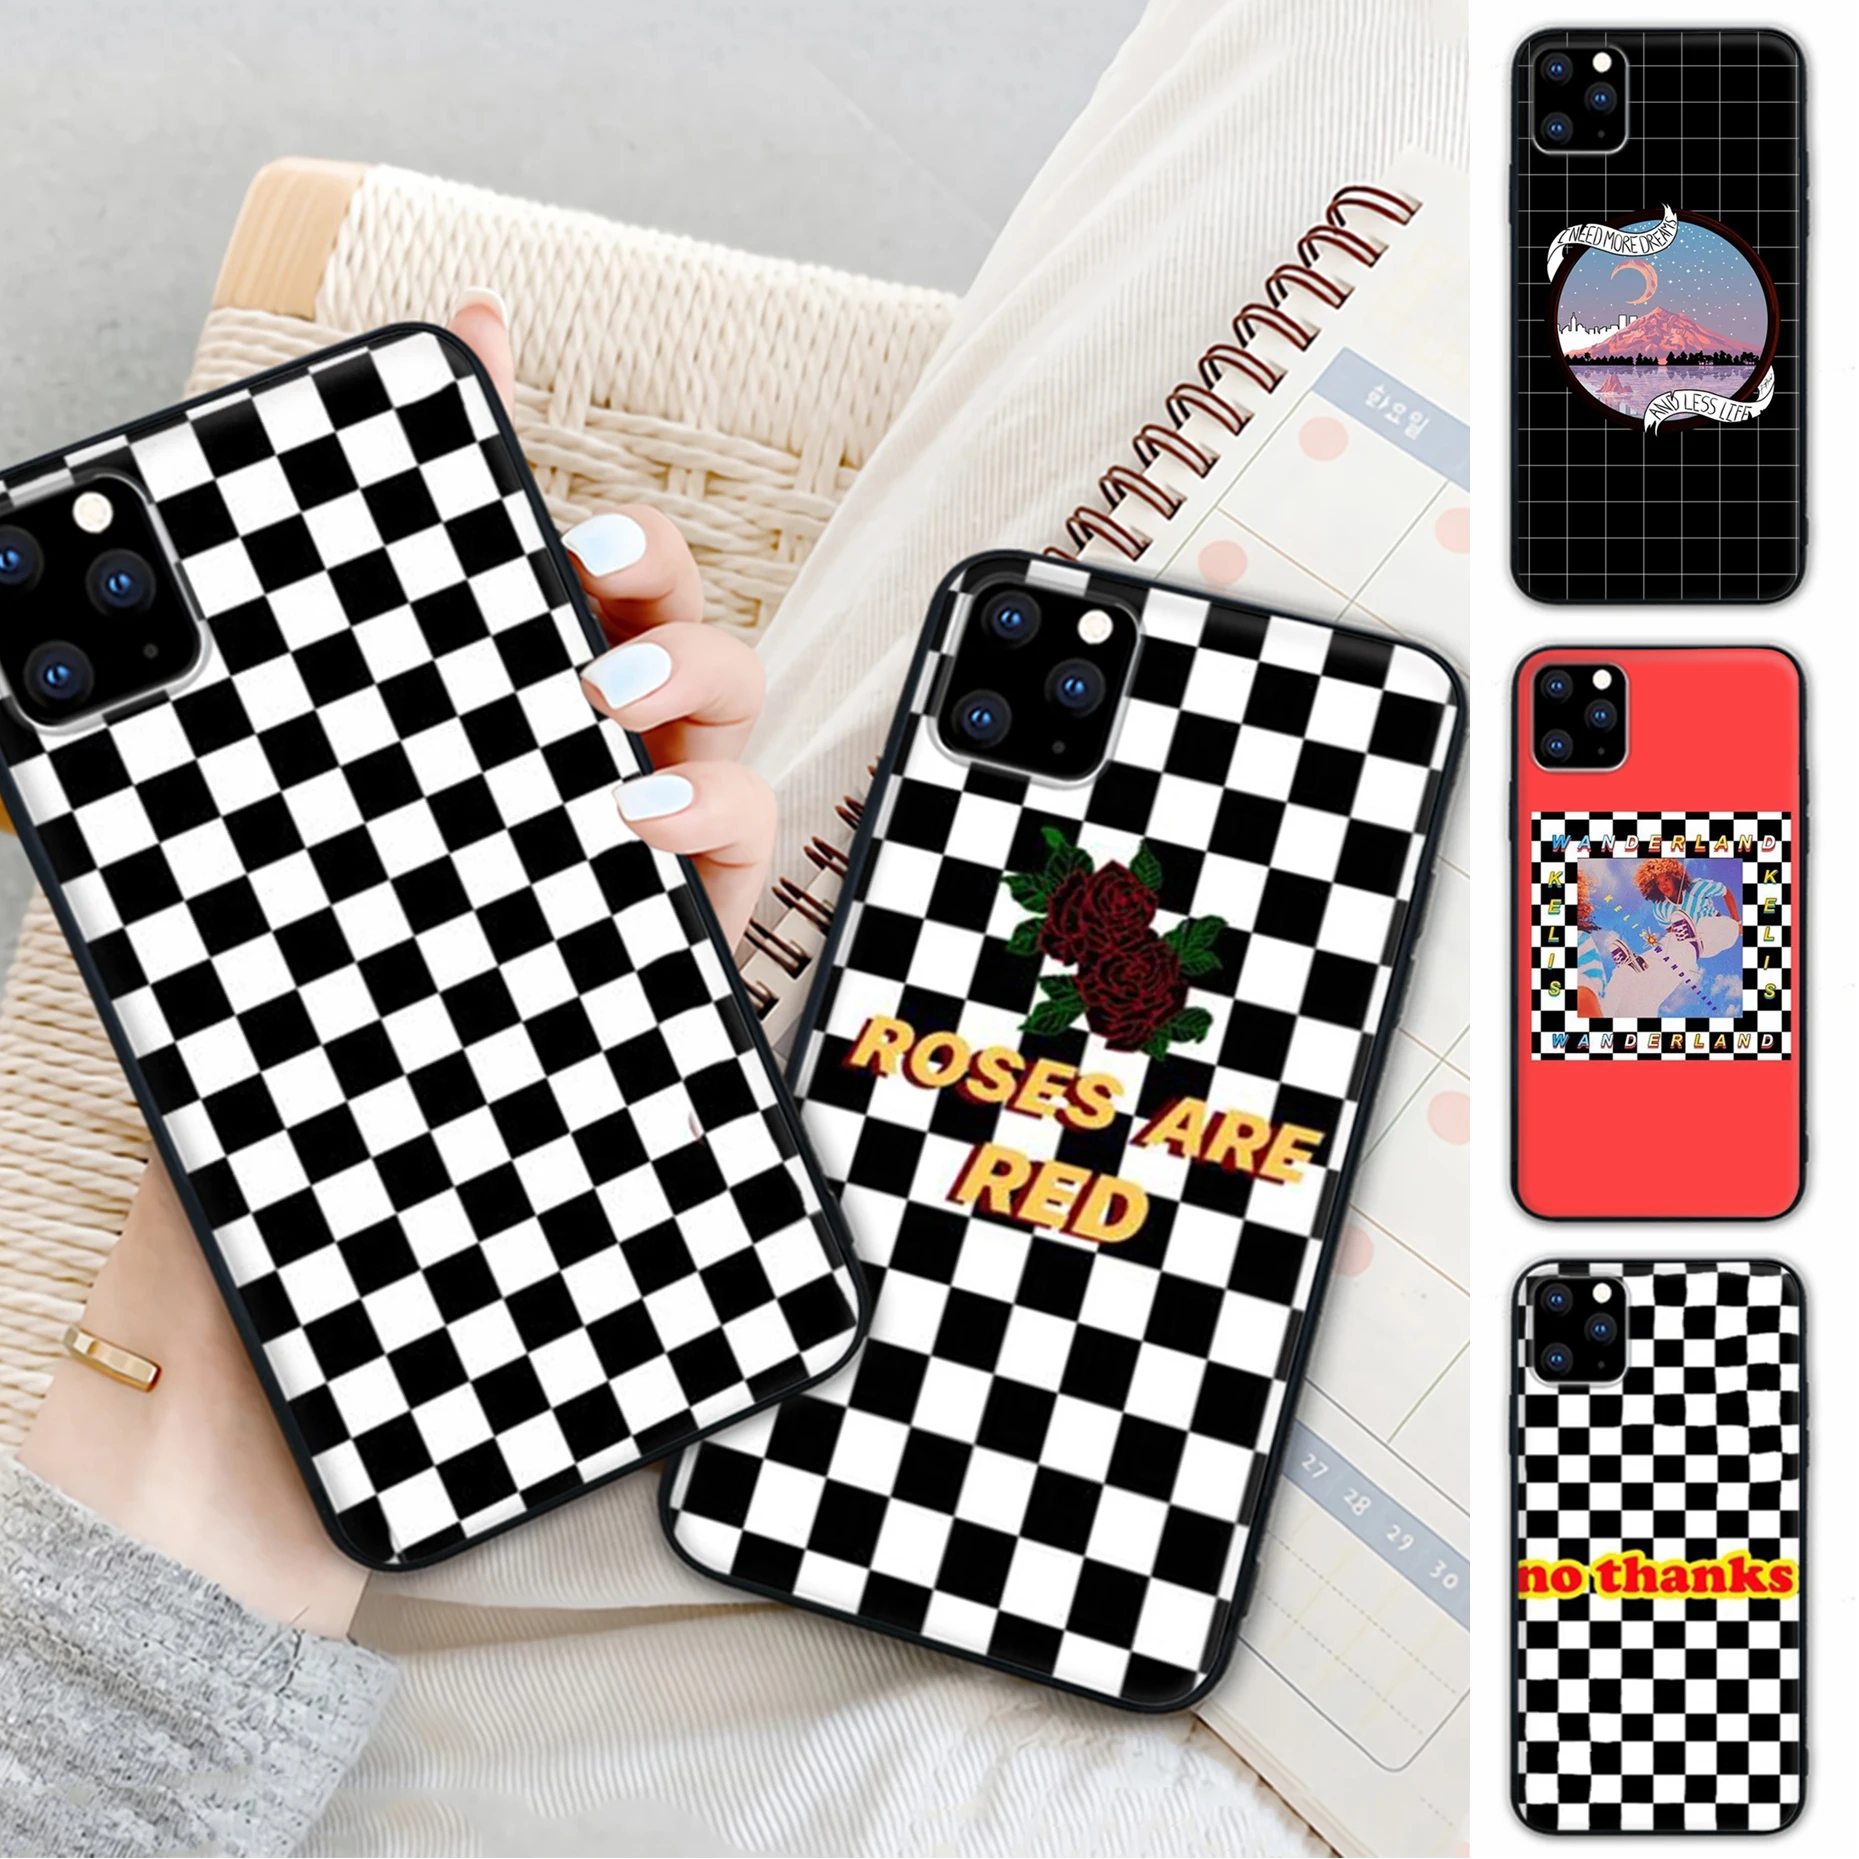 

Elegant Black And White Chess Mobile Telephone Cover Case For Samsung Galaxy M30S A01 A21 A31 A51 A71 A91 A10S A20S A30S A50S